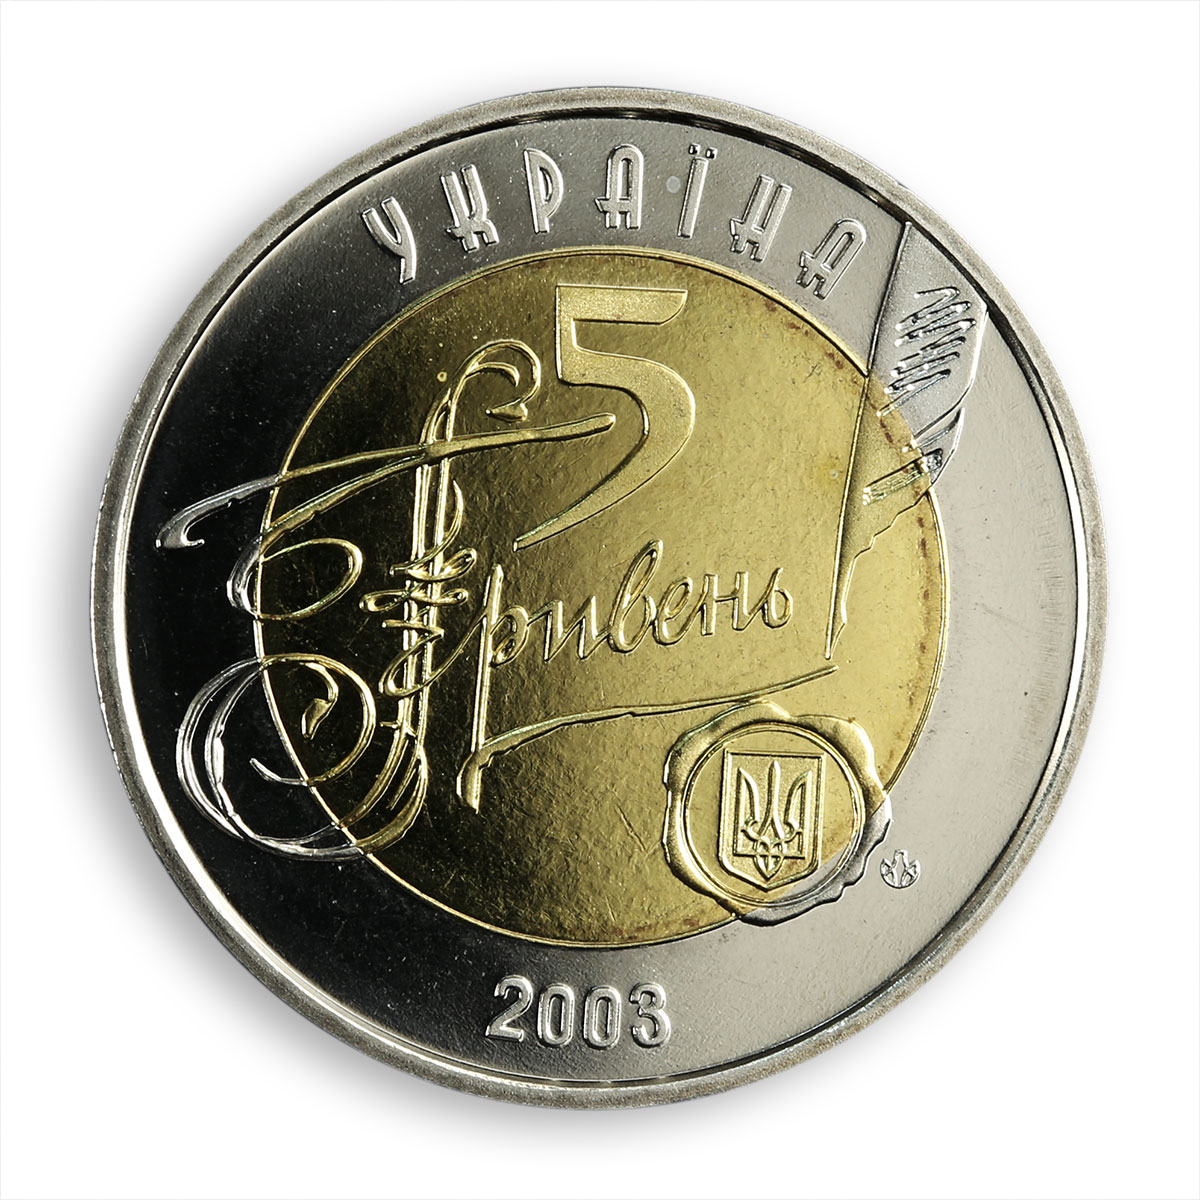 Ukraine 5 hryvnia 150 years Central State Historical Archives bimetal coin 2003